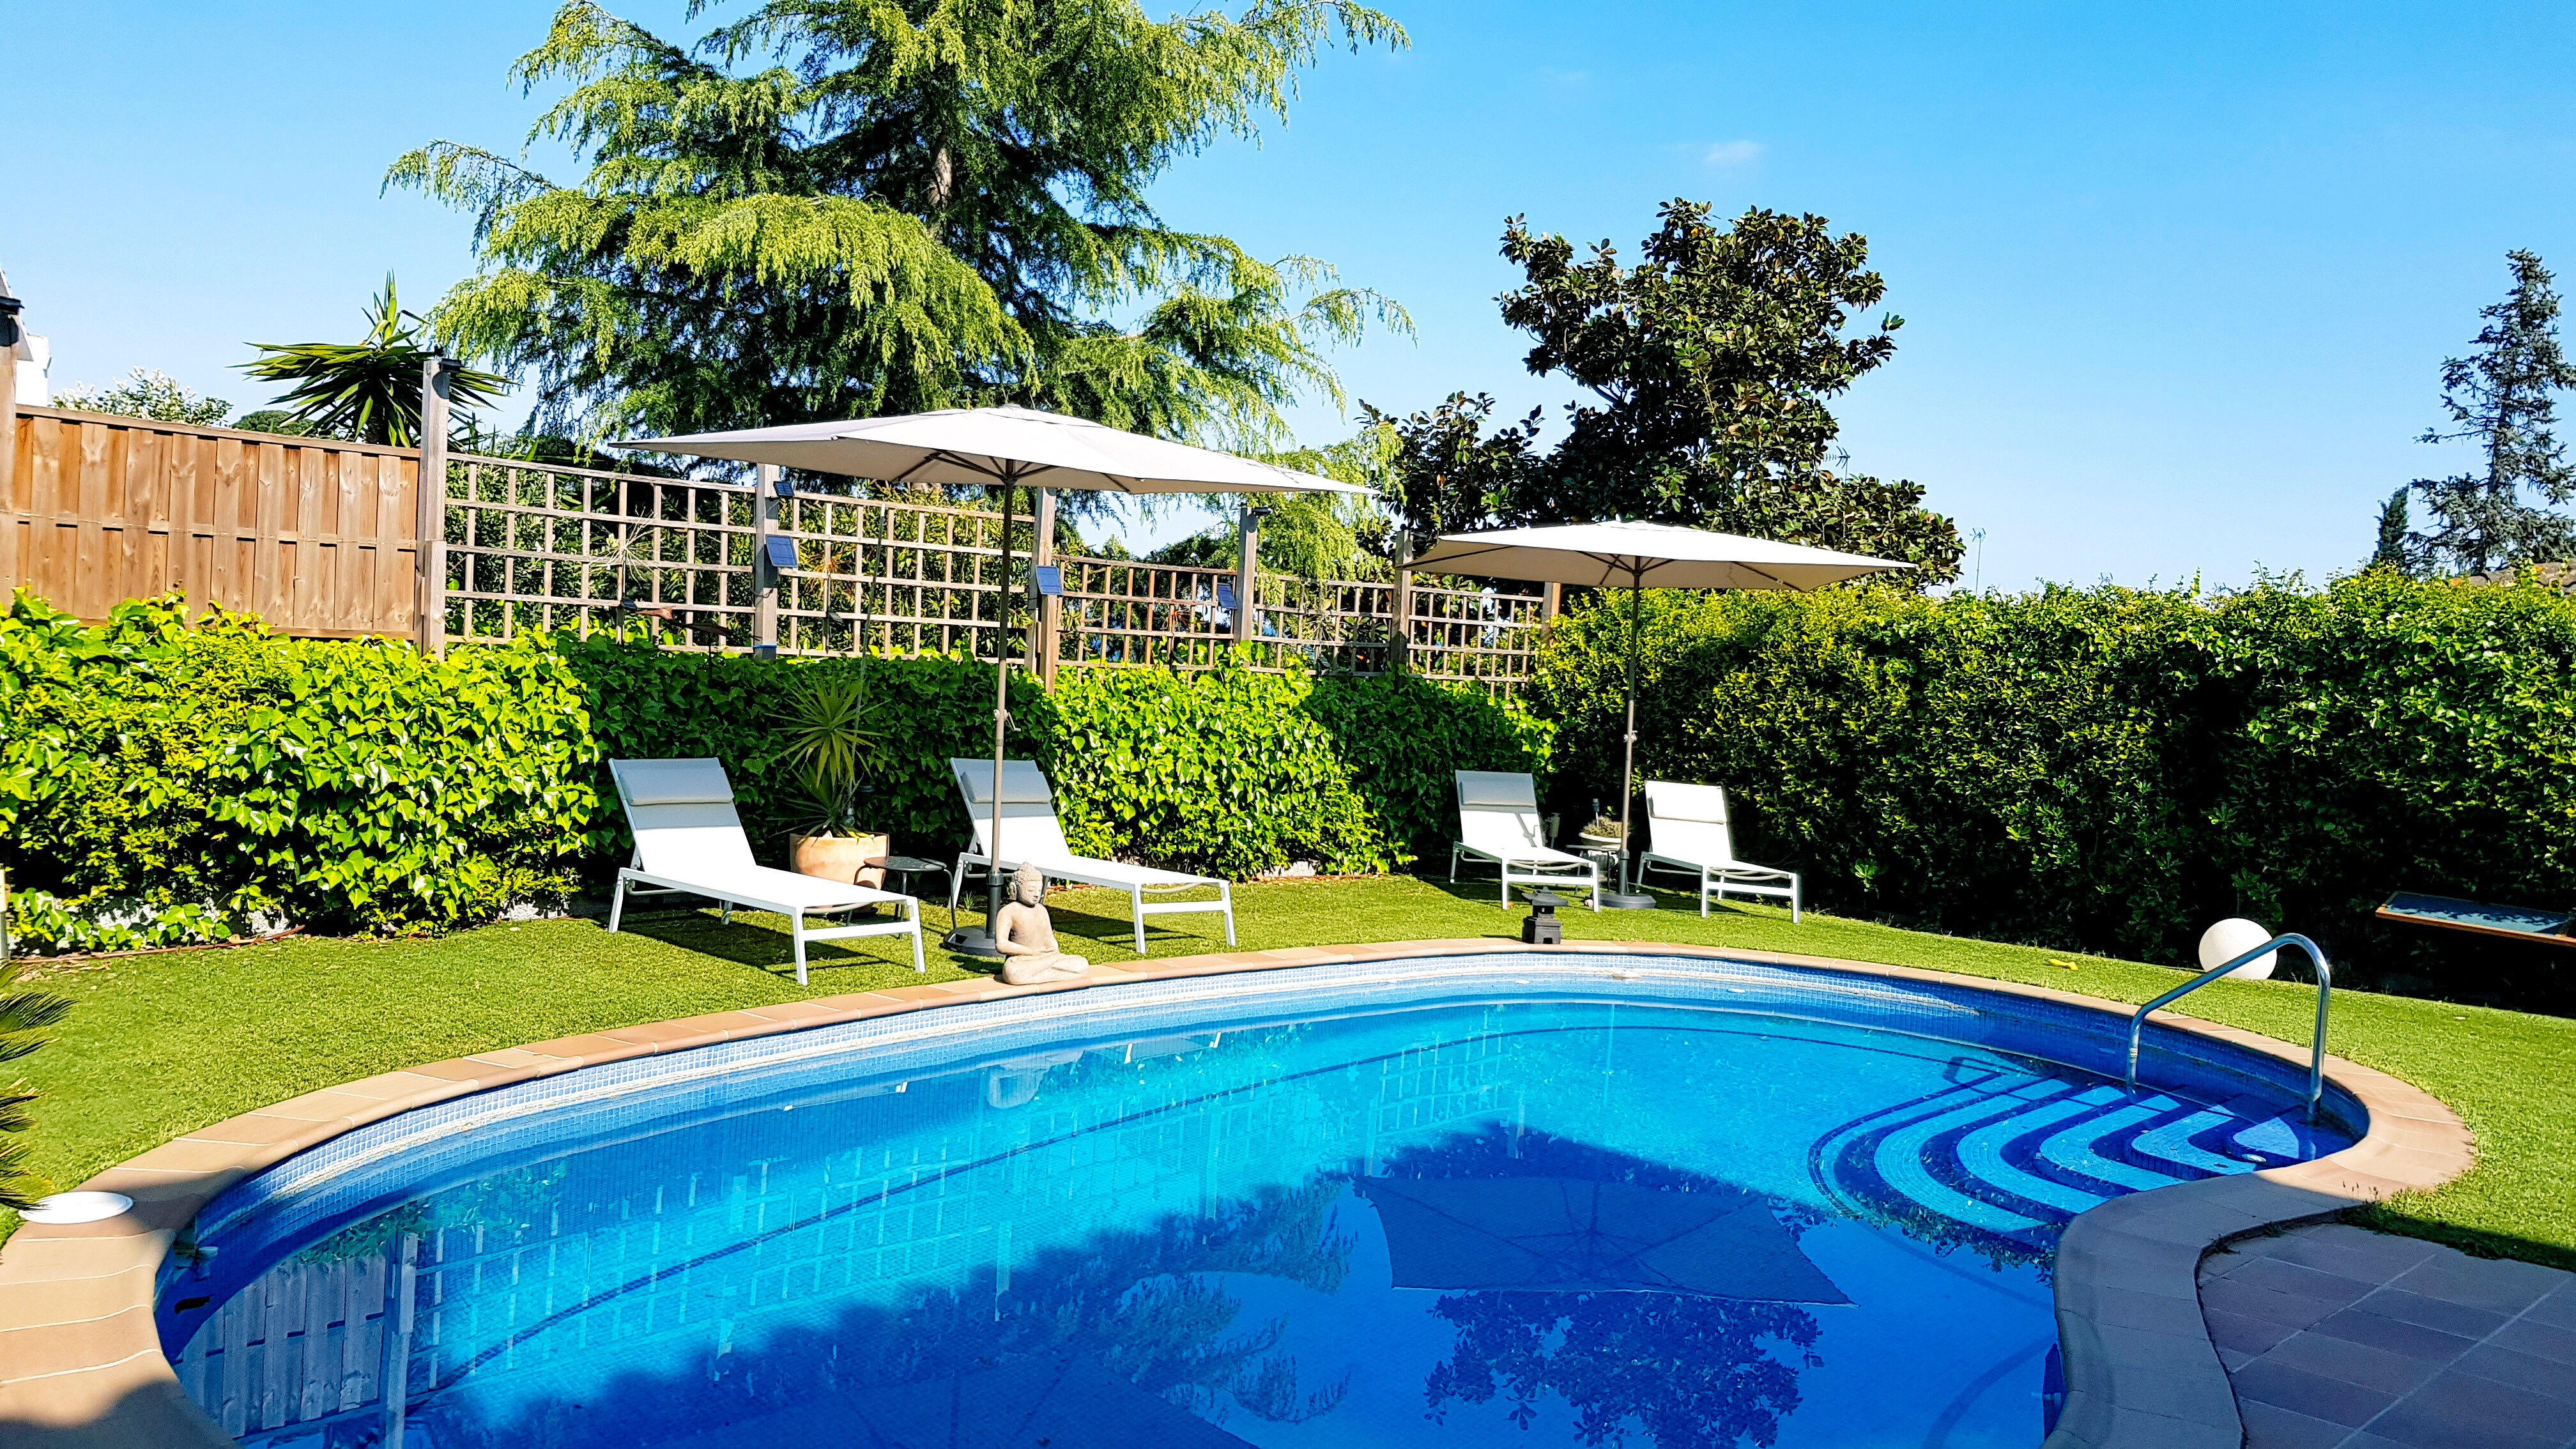 Property Image 1 - Amazing Villa in Arenys de Mar with pool & gym